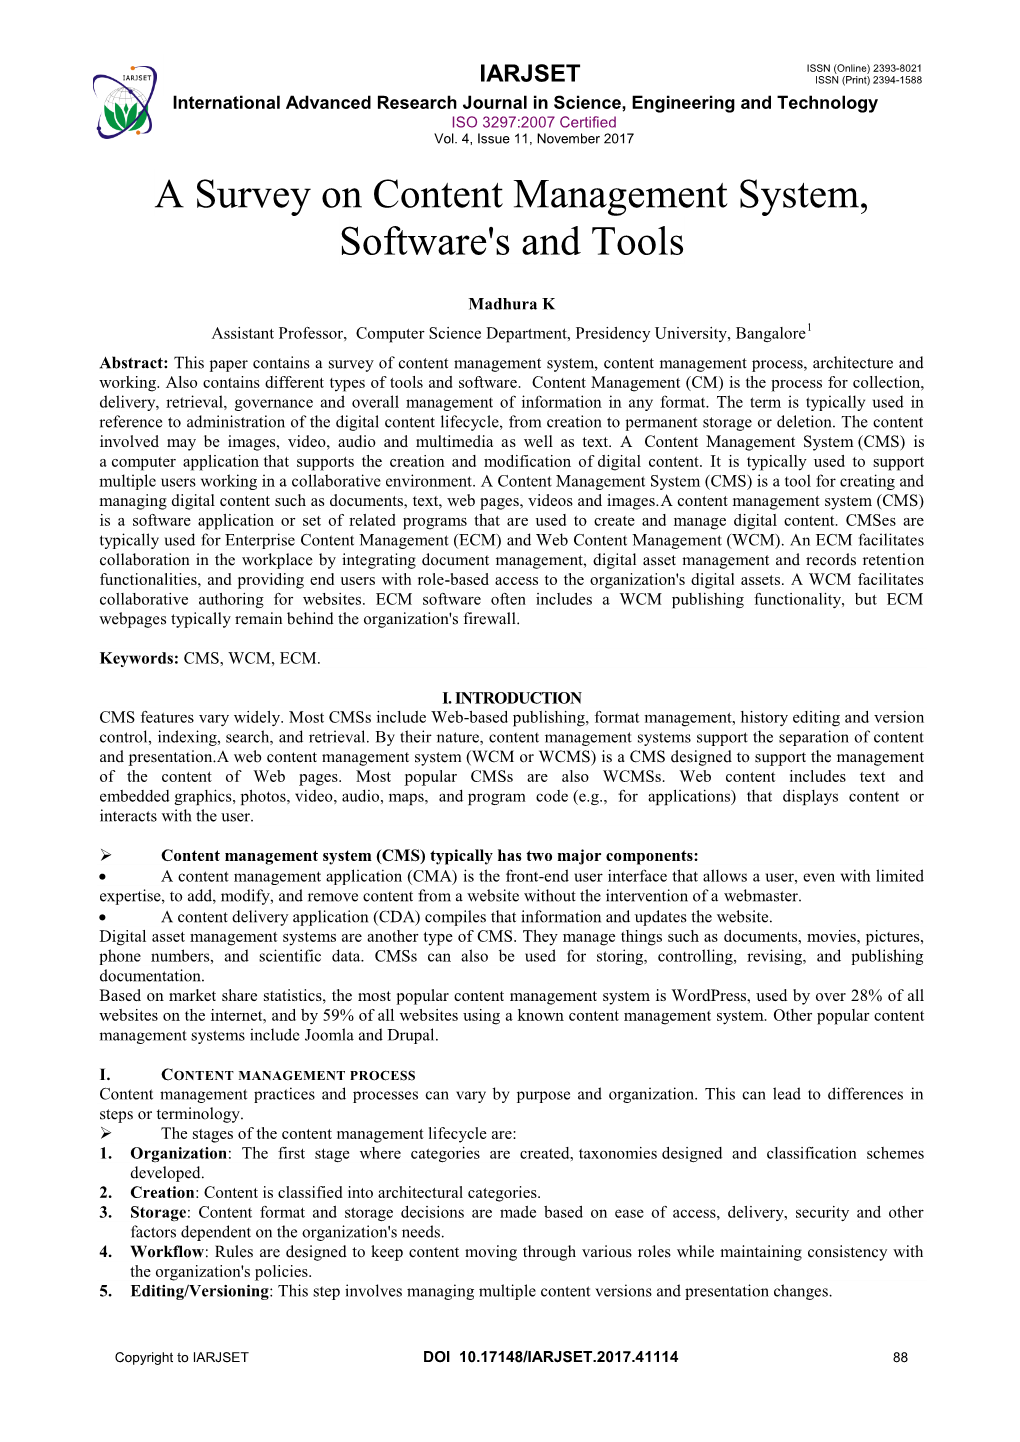 A Survey on Content Management System, Software's and Tools